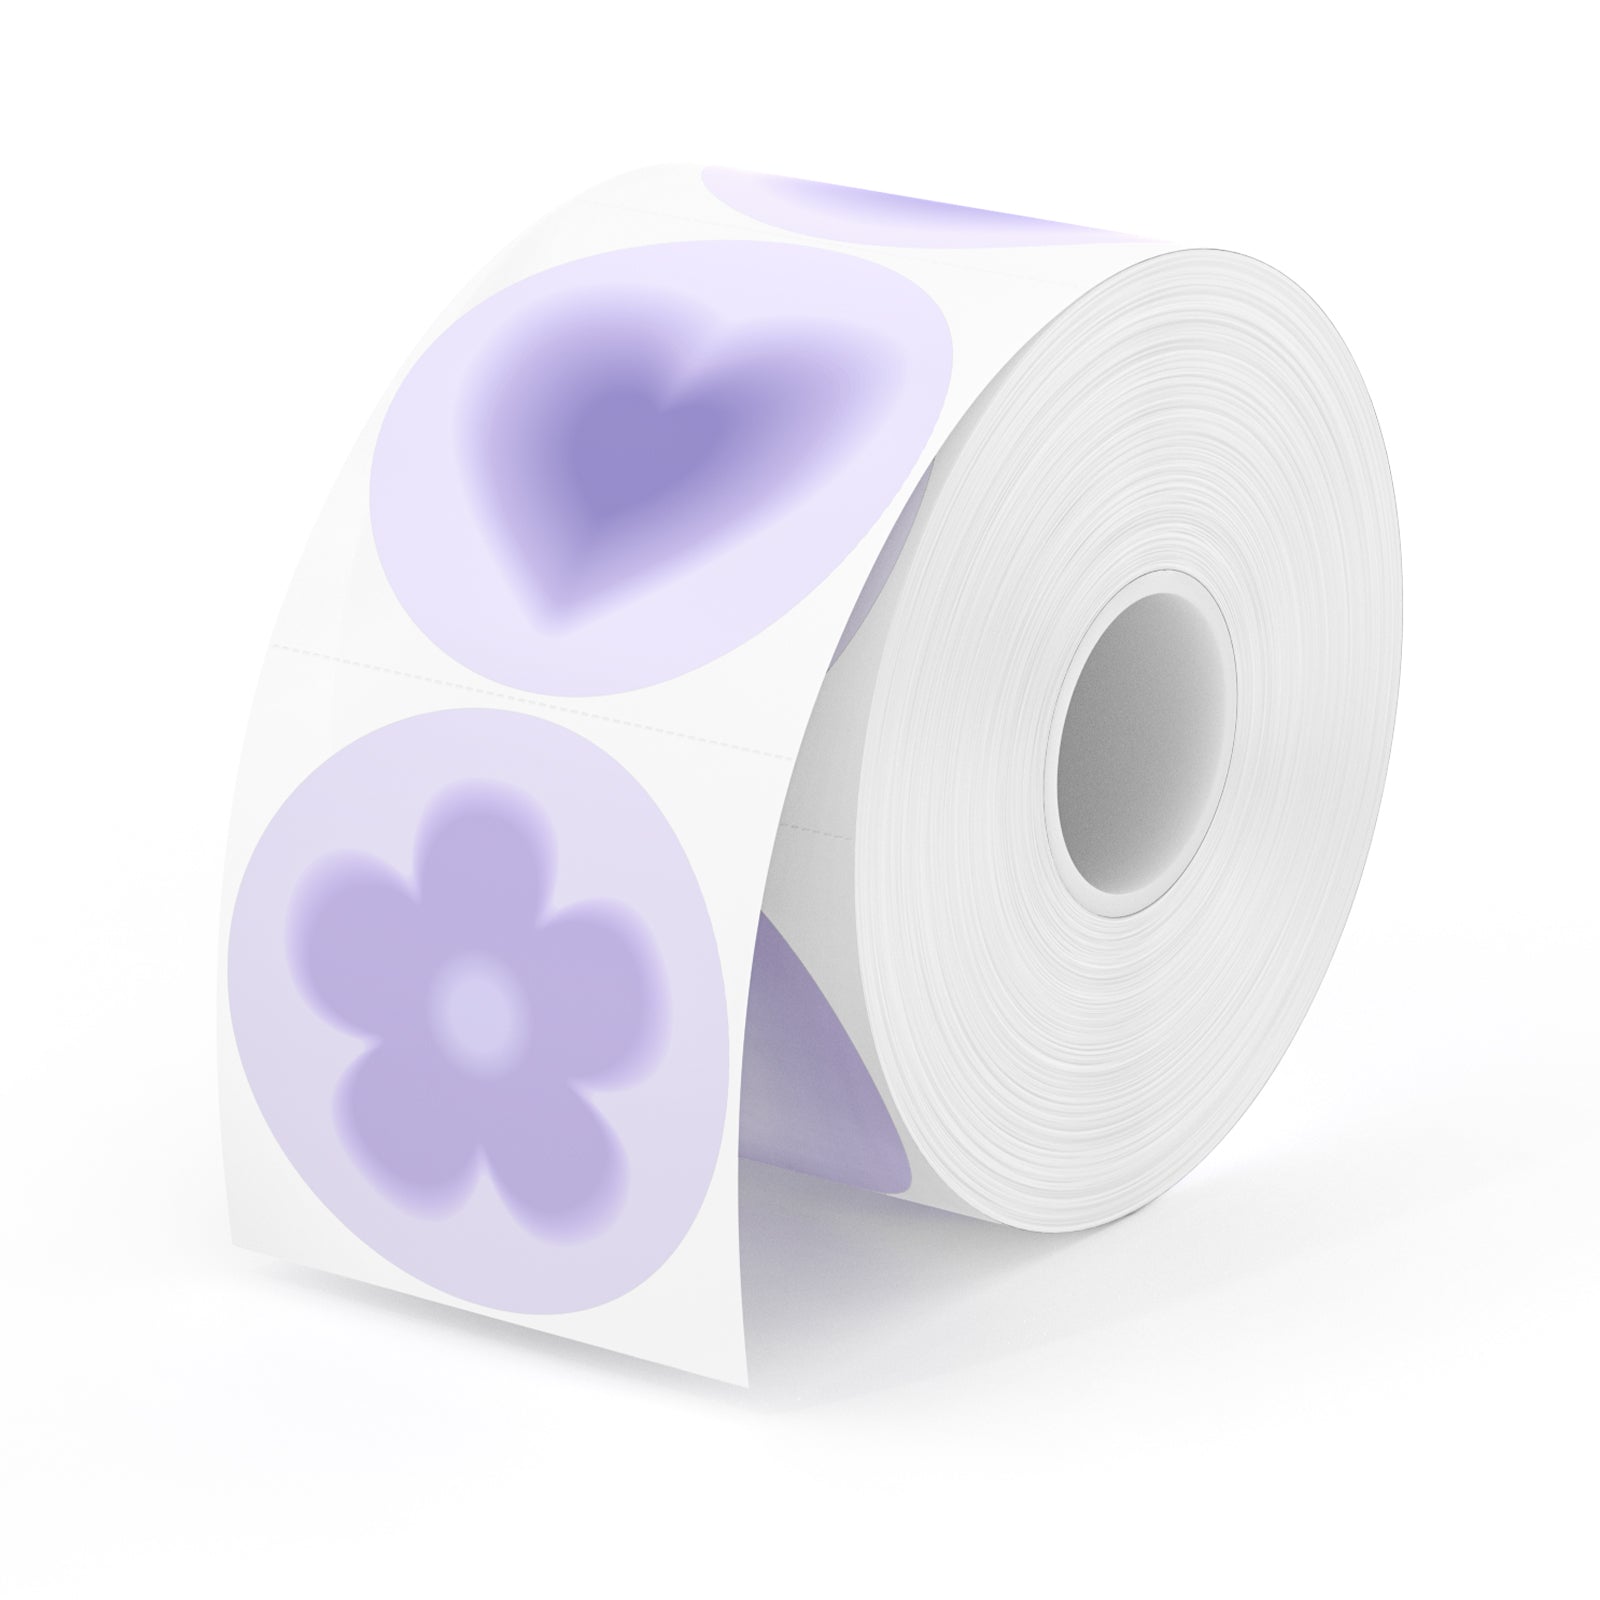 Elevate your labeling game with MUNBYN's 6-in-1 Decorative Round Label Rolls, where each roll has six charming purple patterns. 